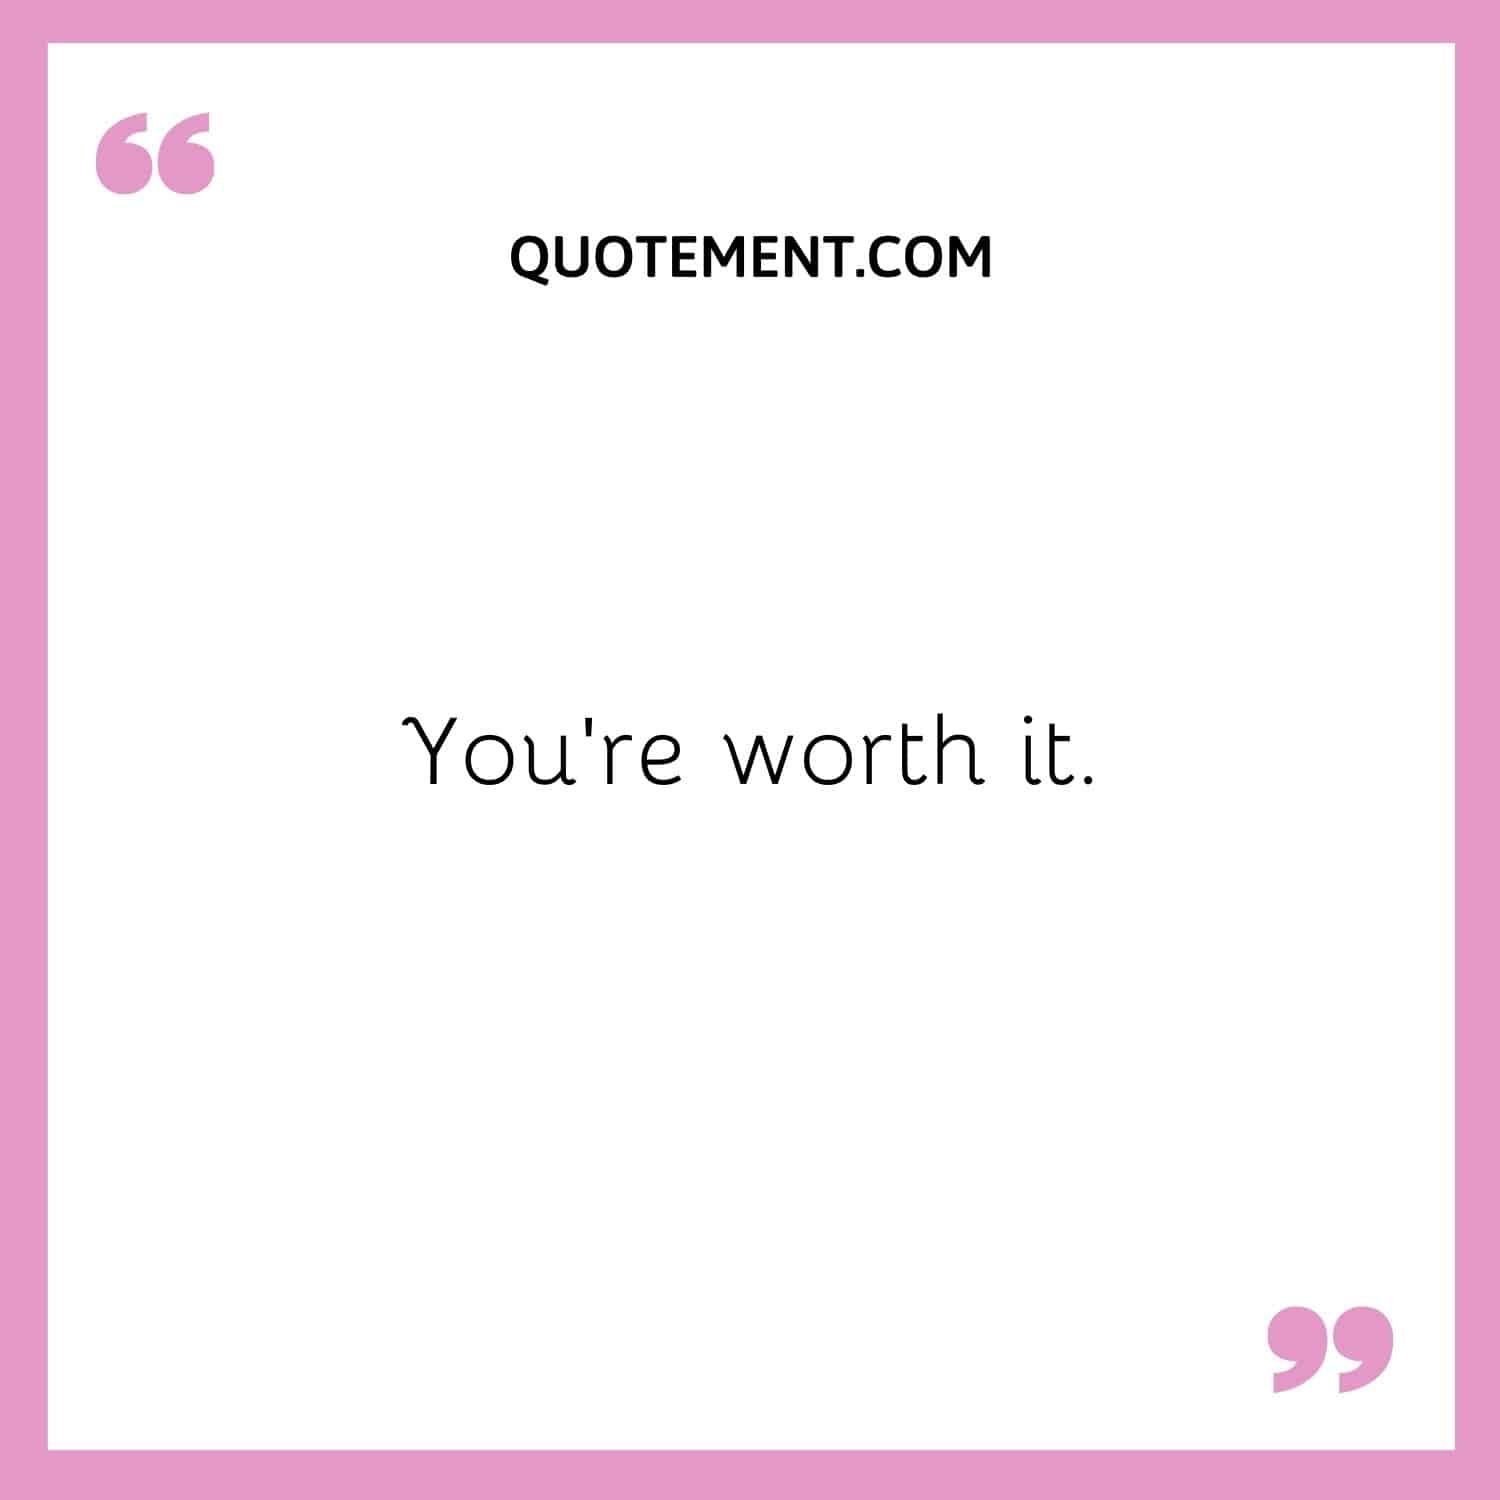 You’re worth it